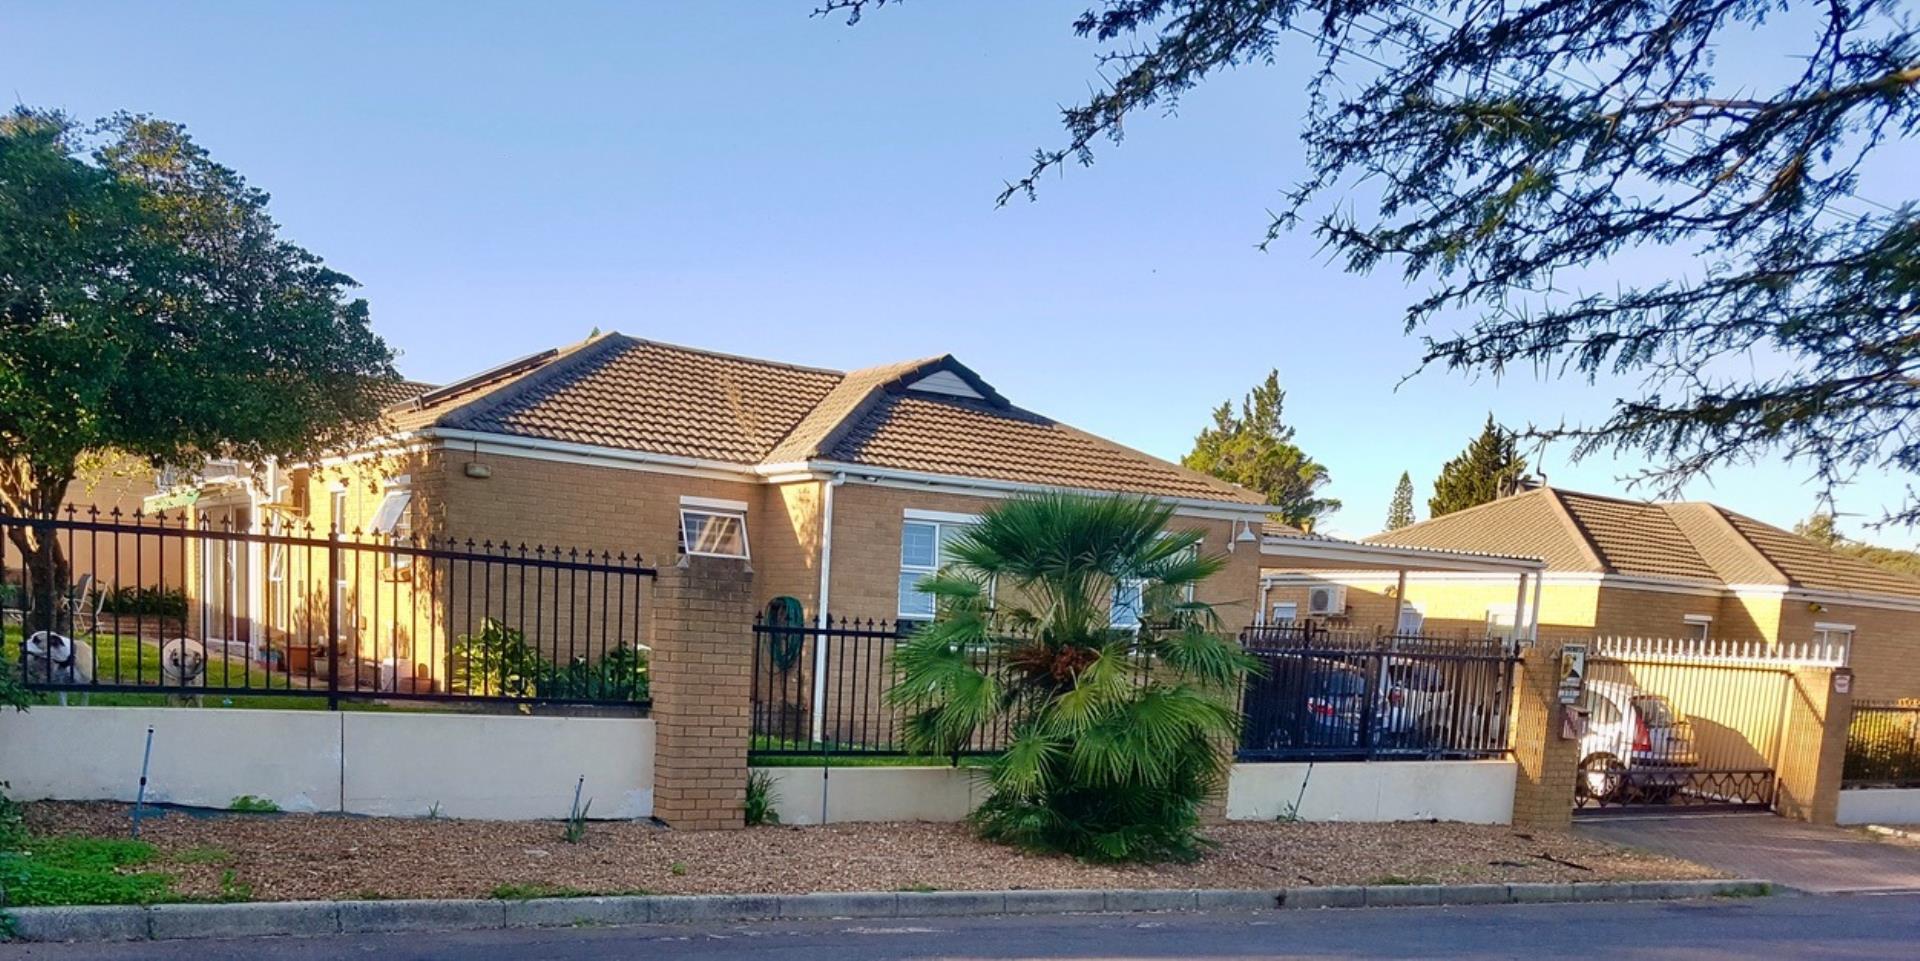 3 Bedroom  House for Sale in Durbanville - Western Cape